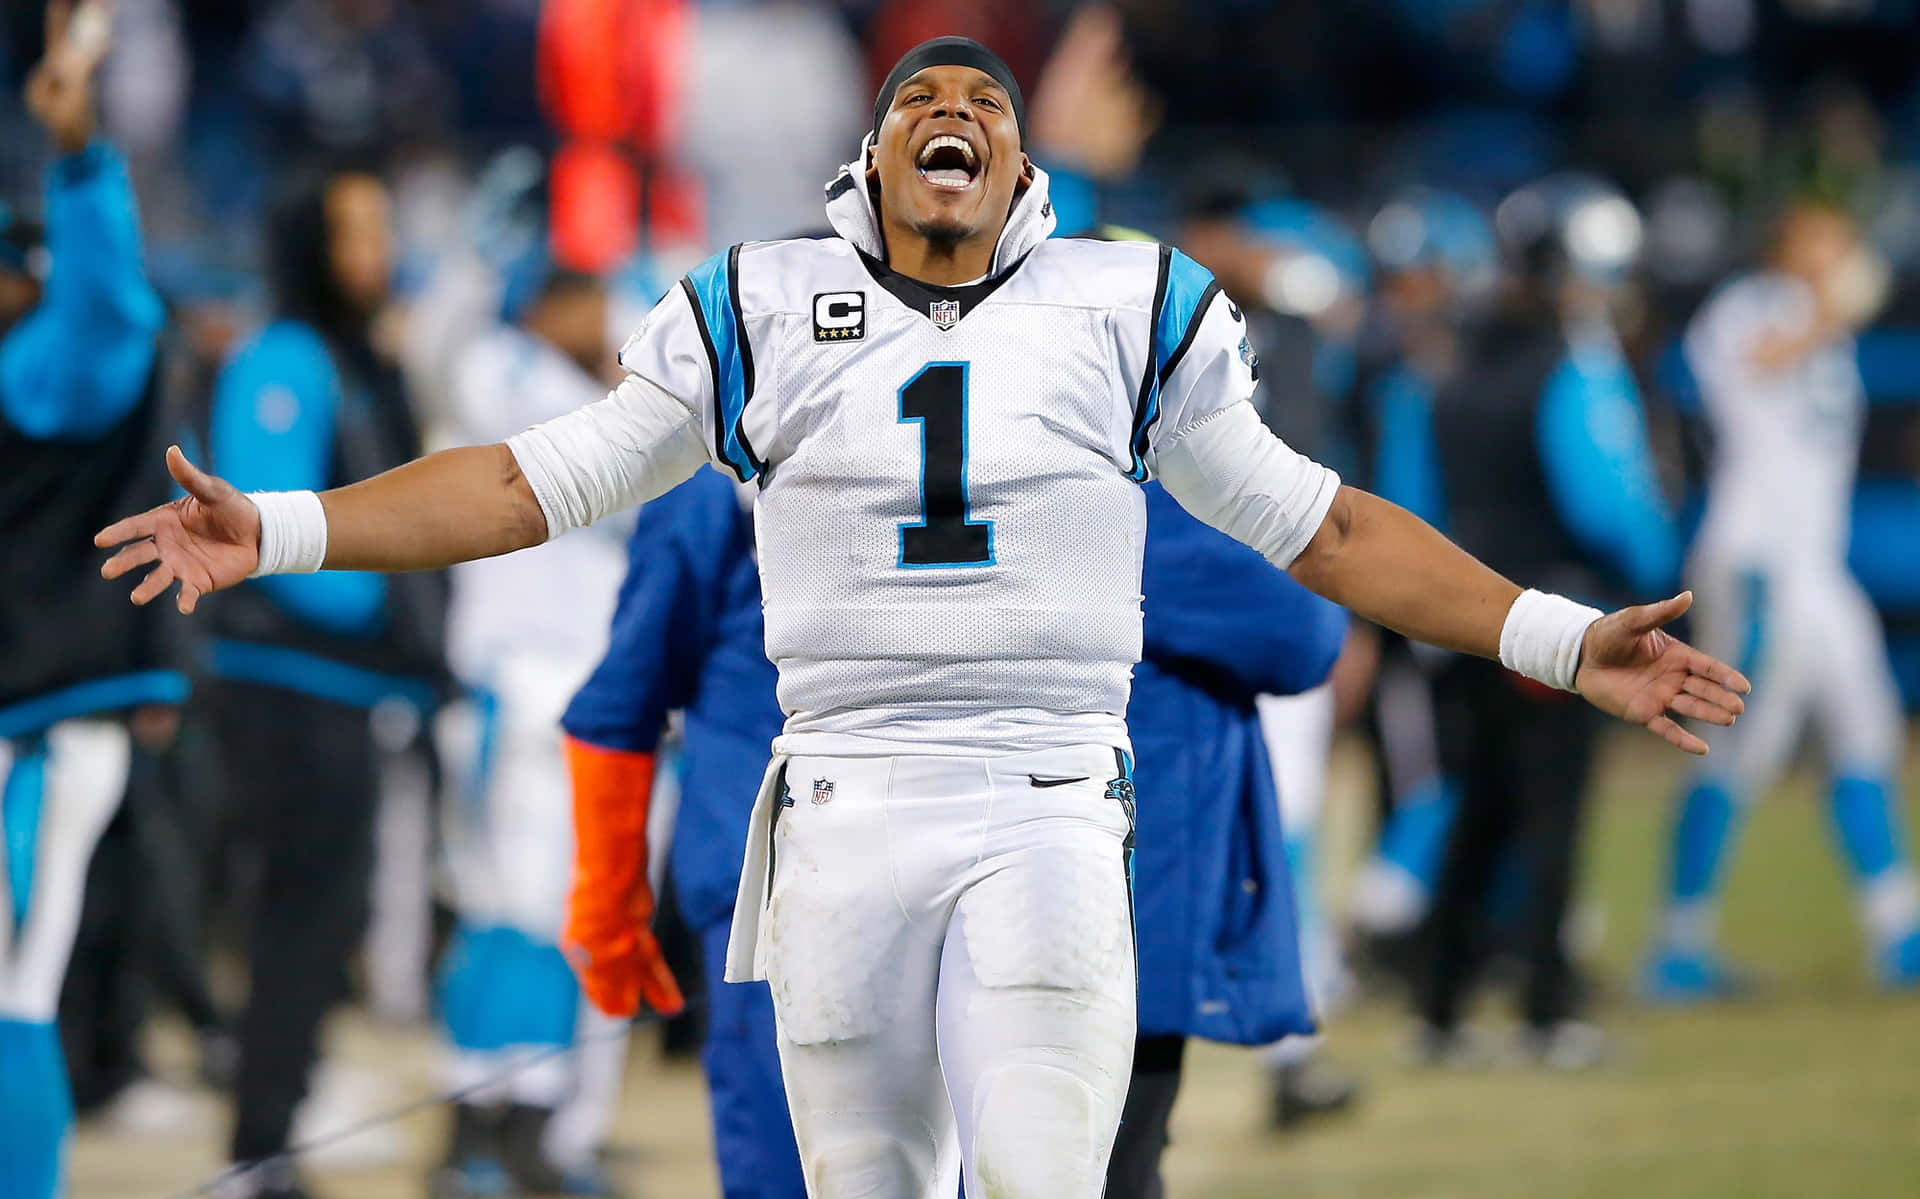 Cam Newton with a large smile on his face during a Carolina Panthers game Wallpaper